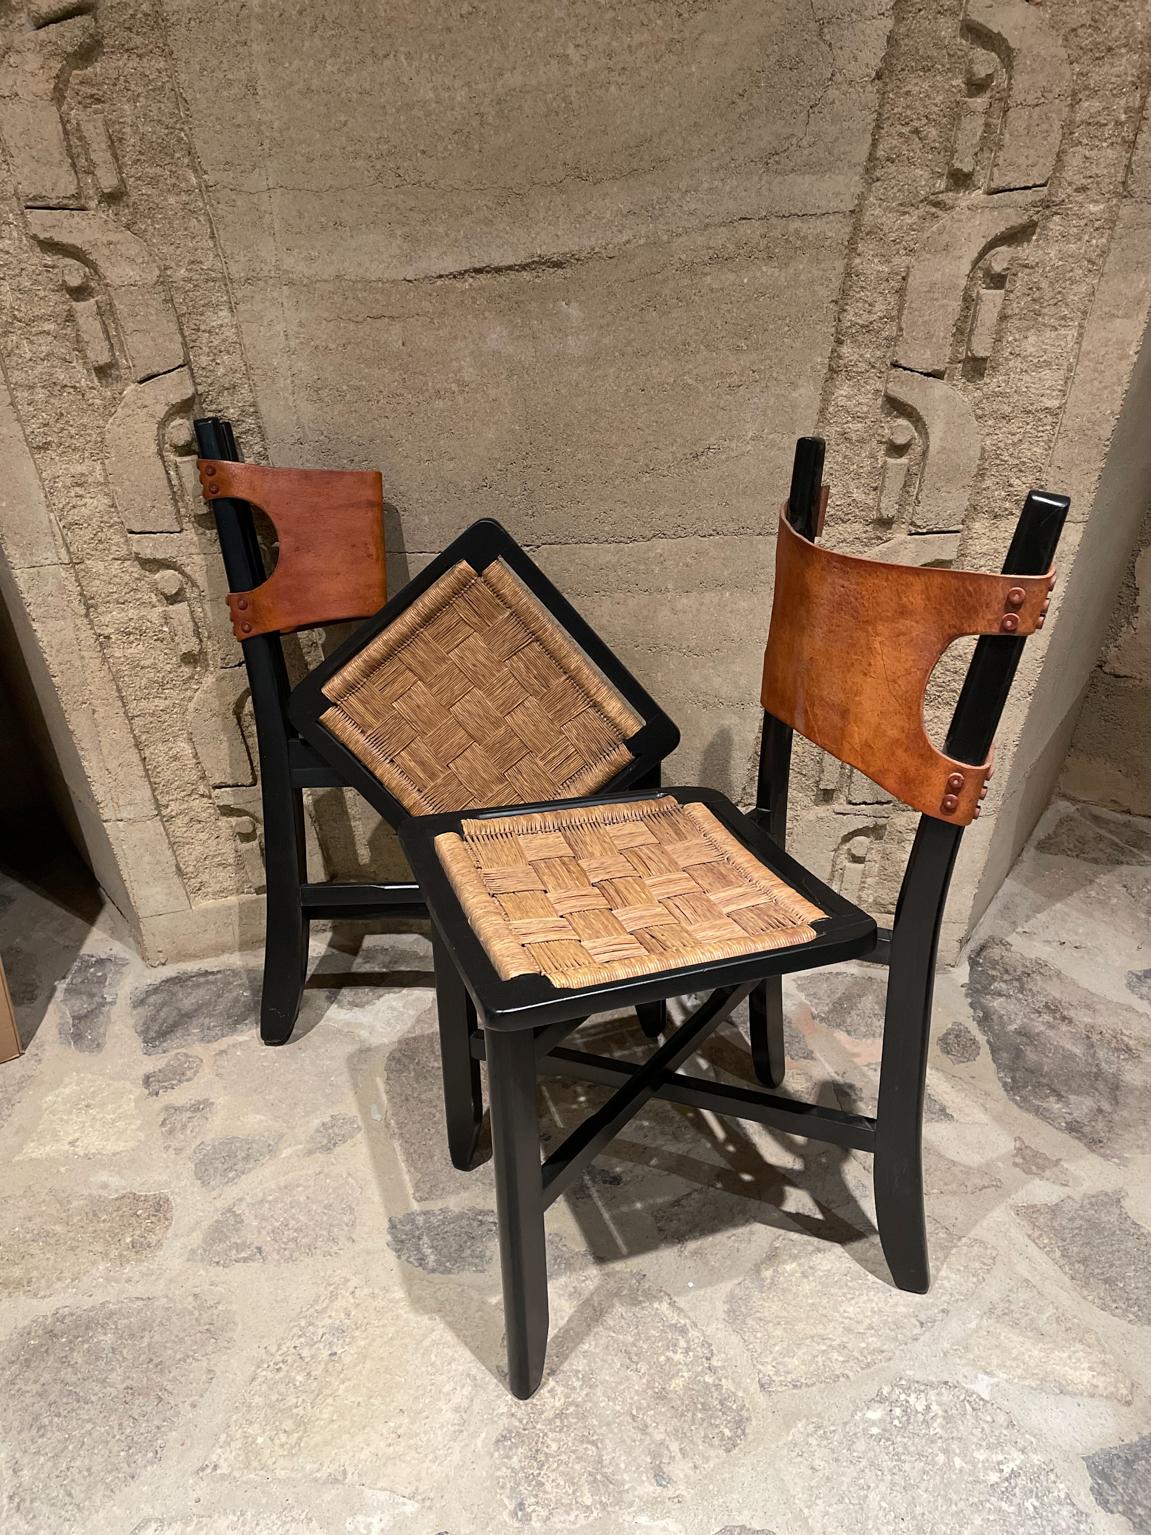 Folding Chairs
From Mexico circa 1950s. Clara Porset Folding Side Chairs. 
Listing is for 2 chairs.
Crafted in Leather and Handwoven Rush Cane with Wood frame painted black. 
Attributed to Clara Porset. Unmarked.
H 32.5 in. x W 14.75 in. x D 18.5